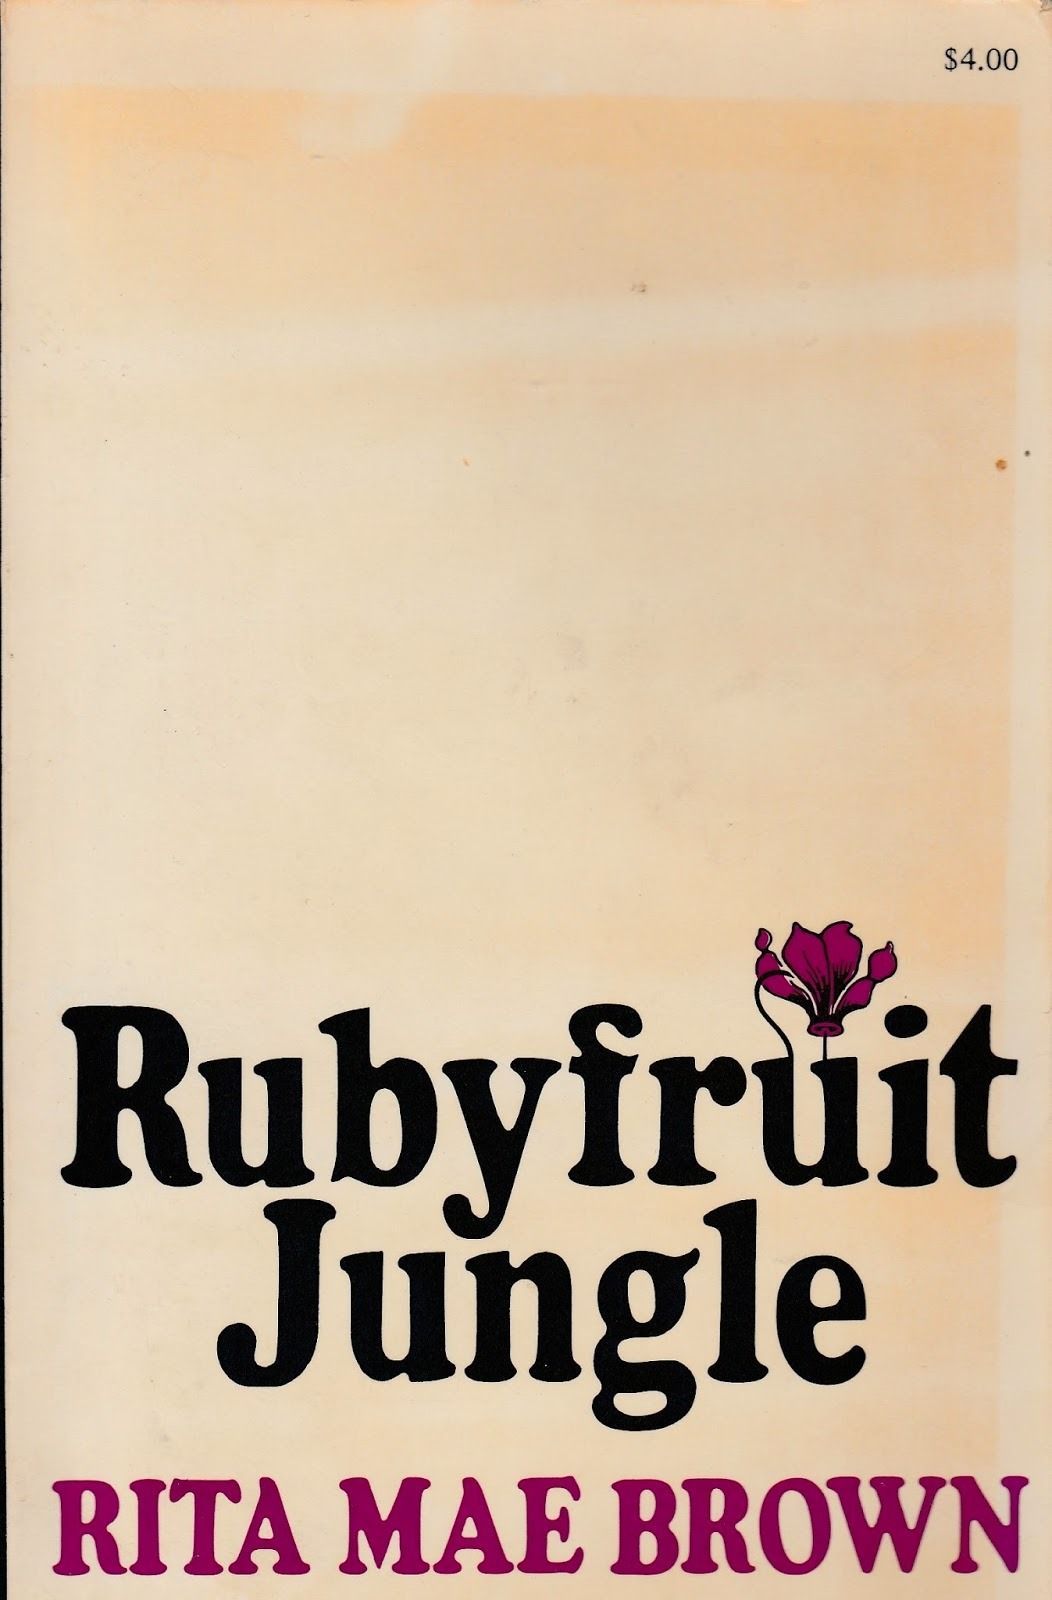 Take a Lesbian for a Drink: On 50 Years of Rita Mae Brown’s “Rubyfruit Jungle”